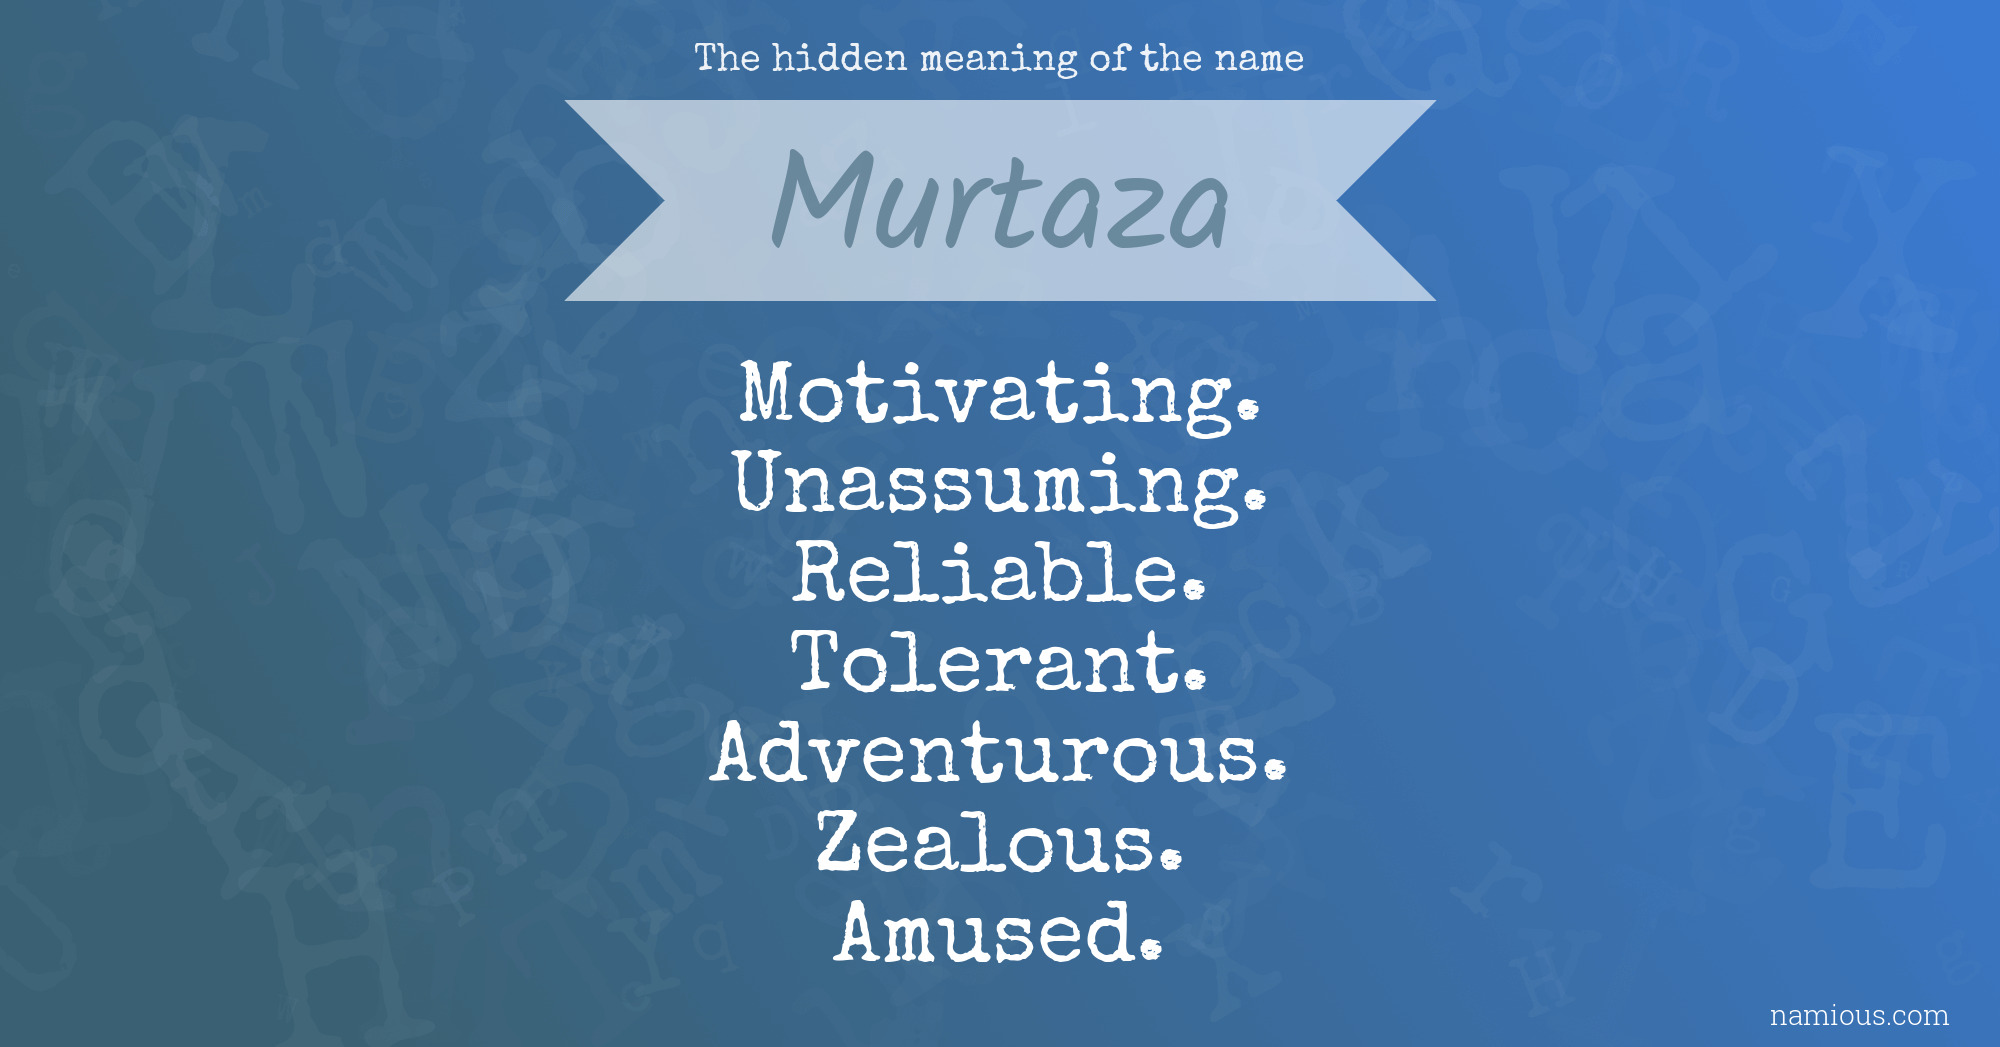 The hidden meaning of the name Murtaza